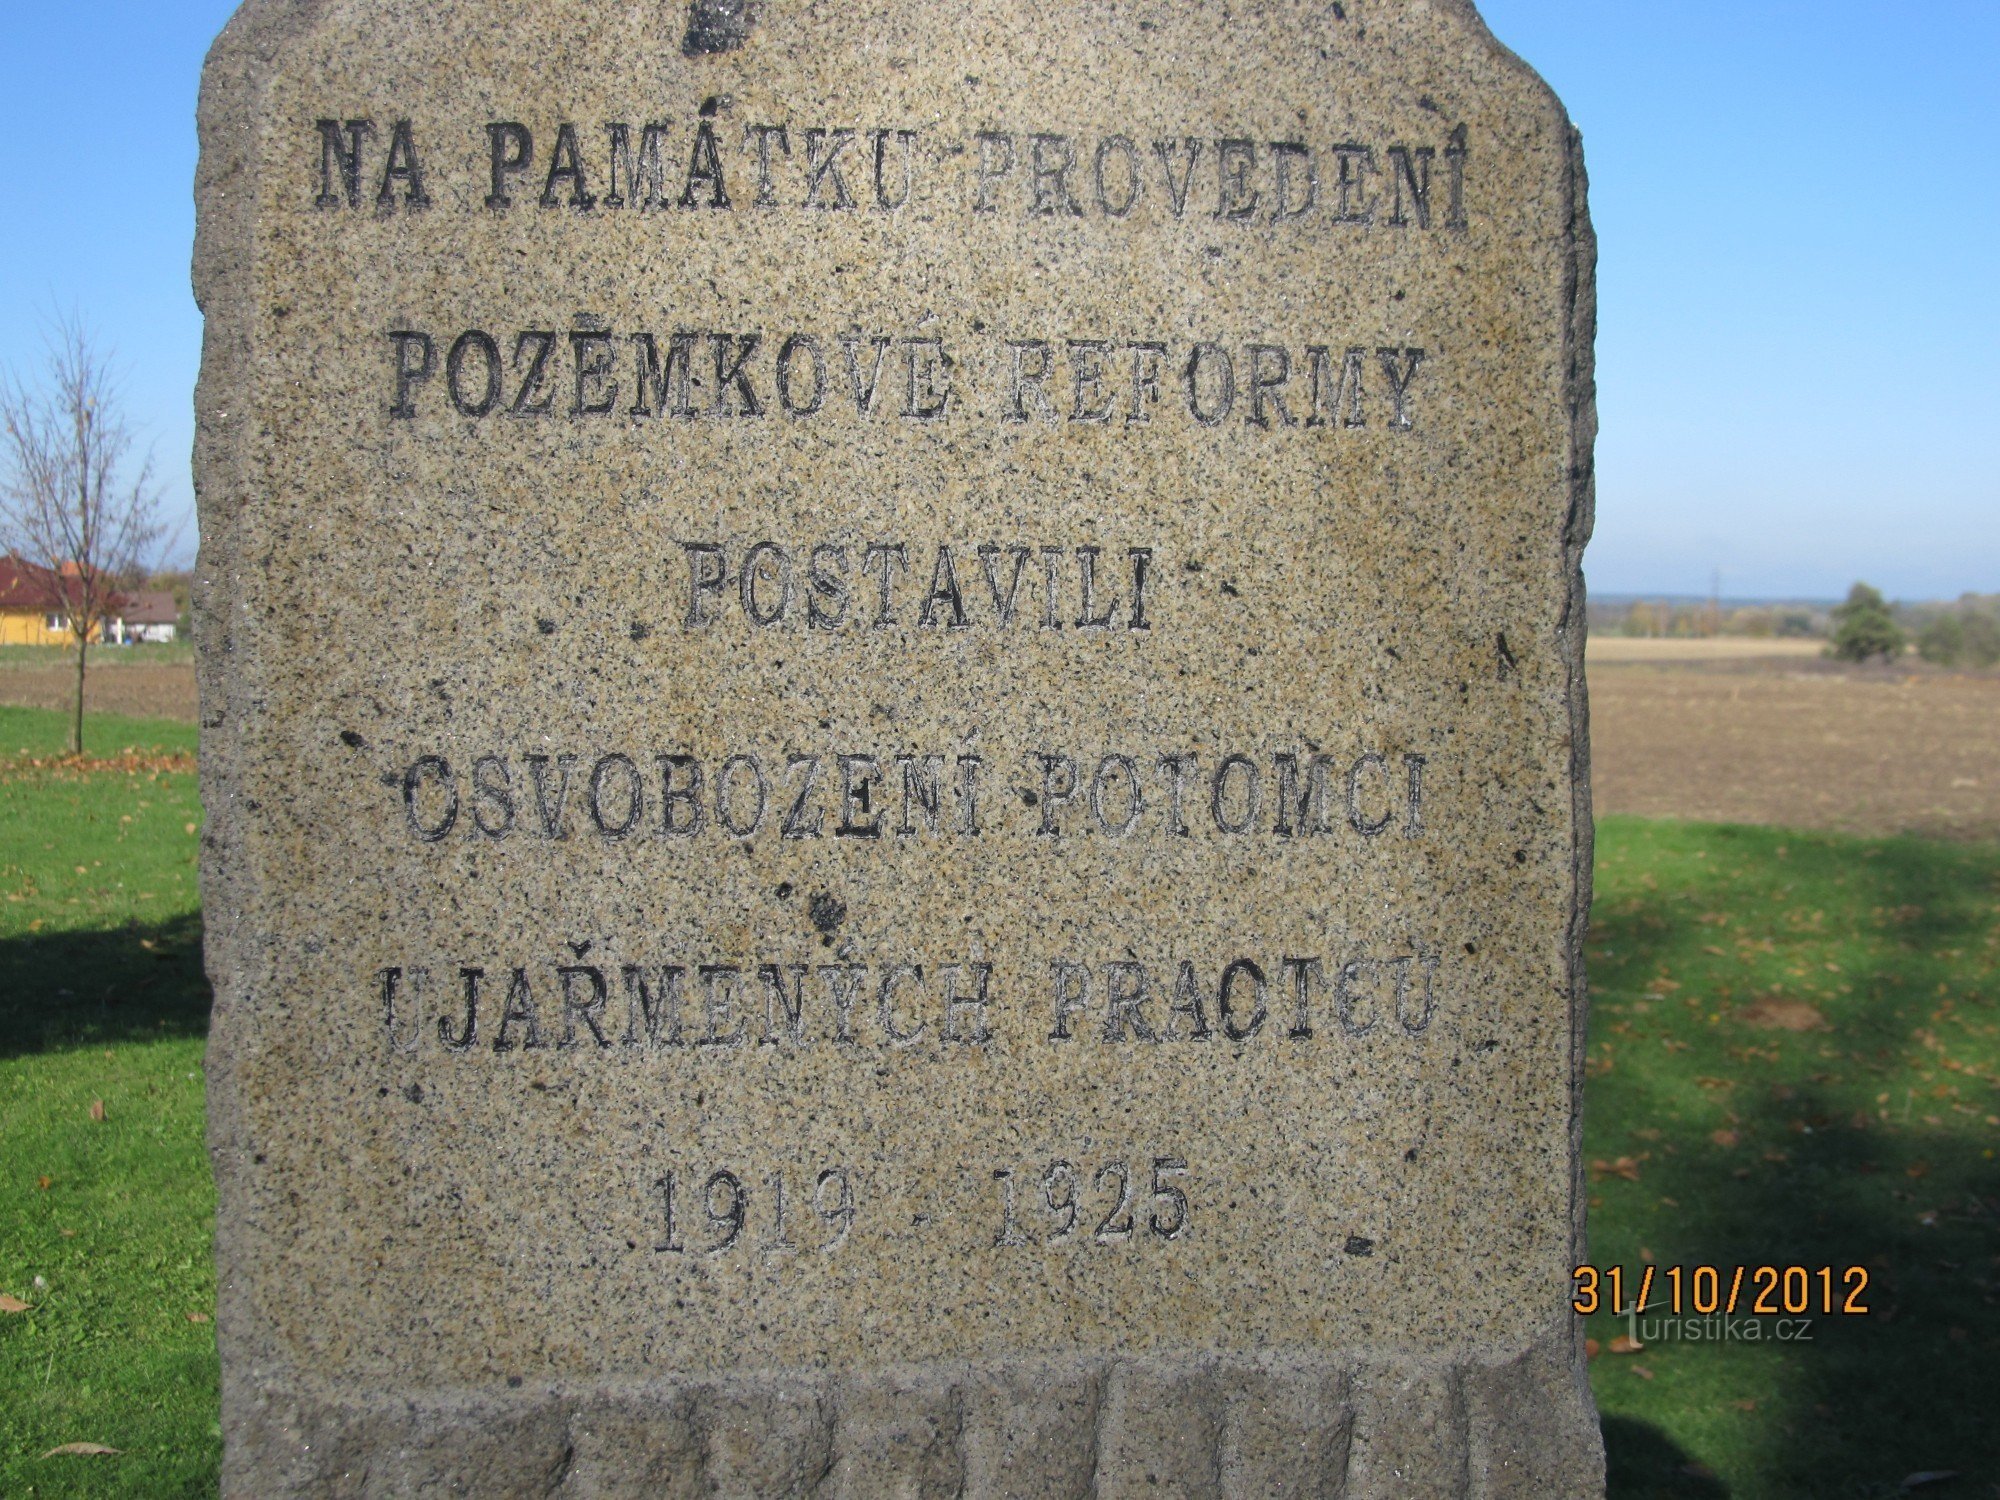 Monument to the land reform from 1919-1938 in Hlízov in front of the cemetery - inscription on the monument